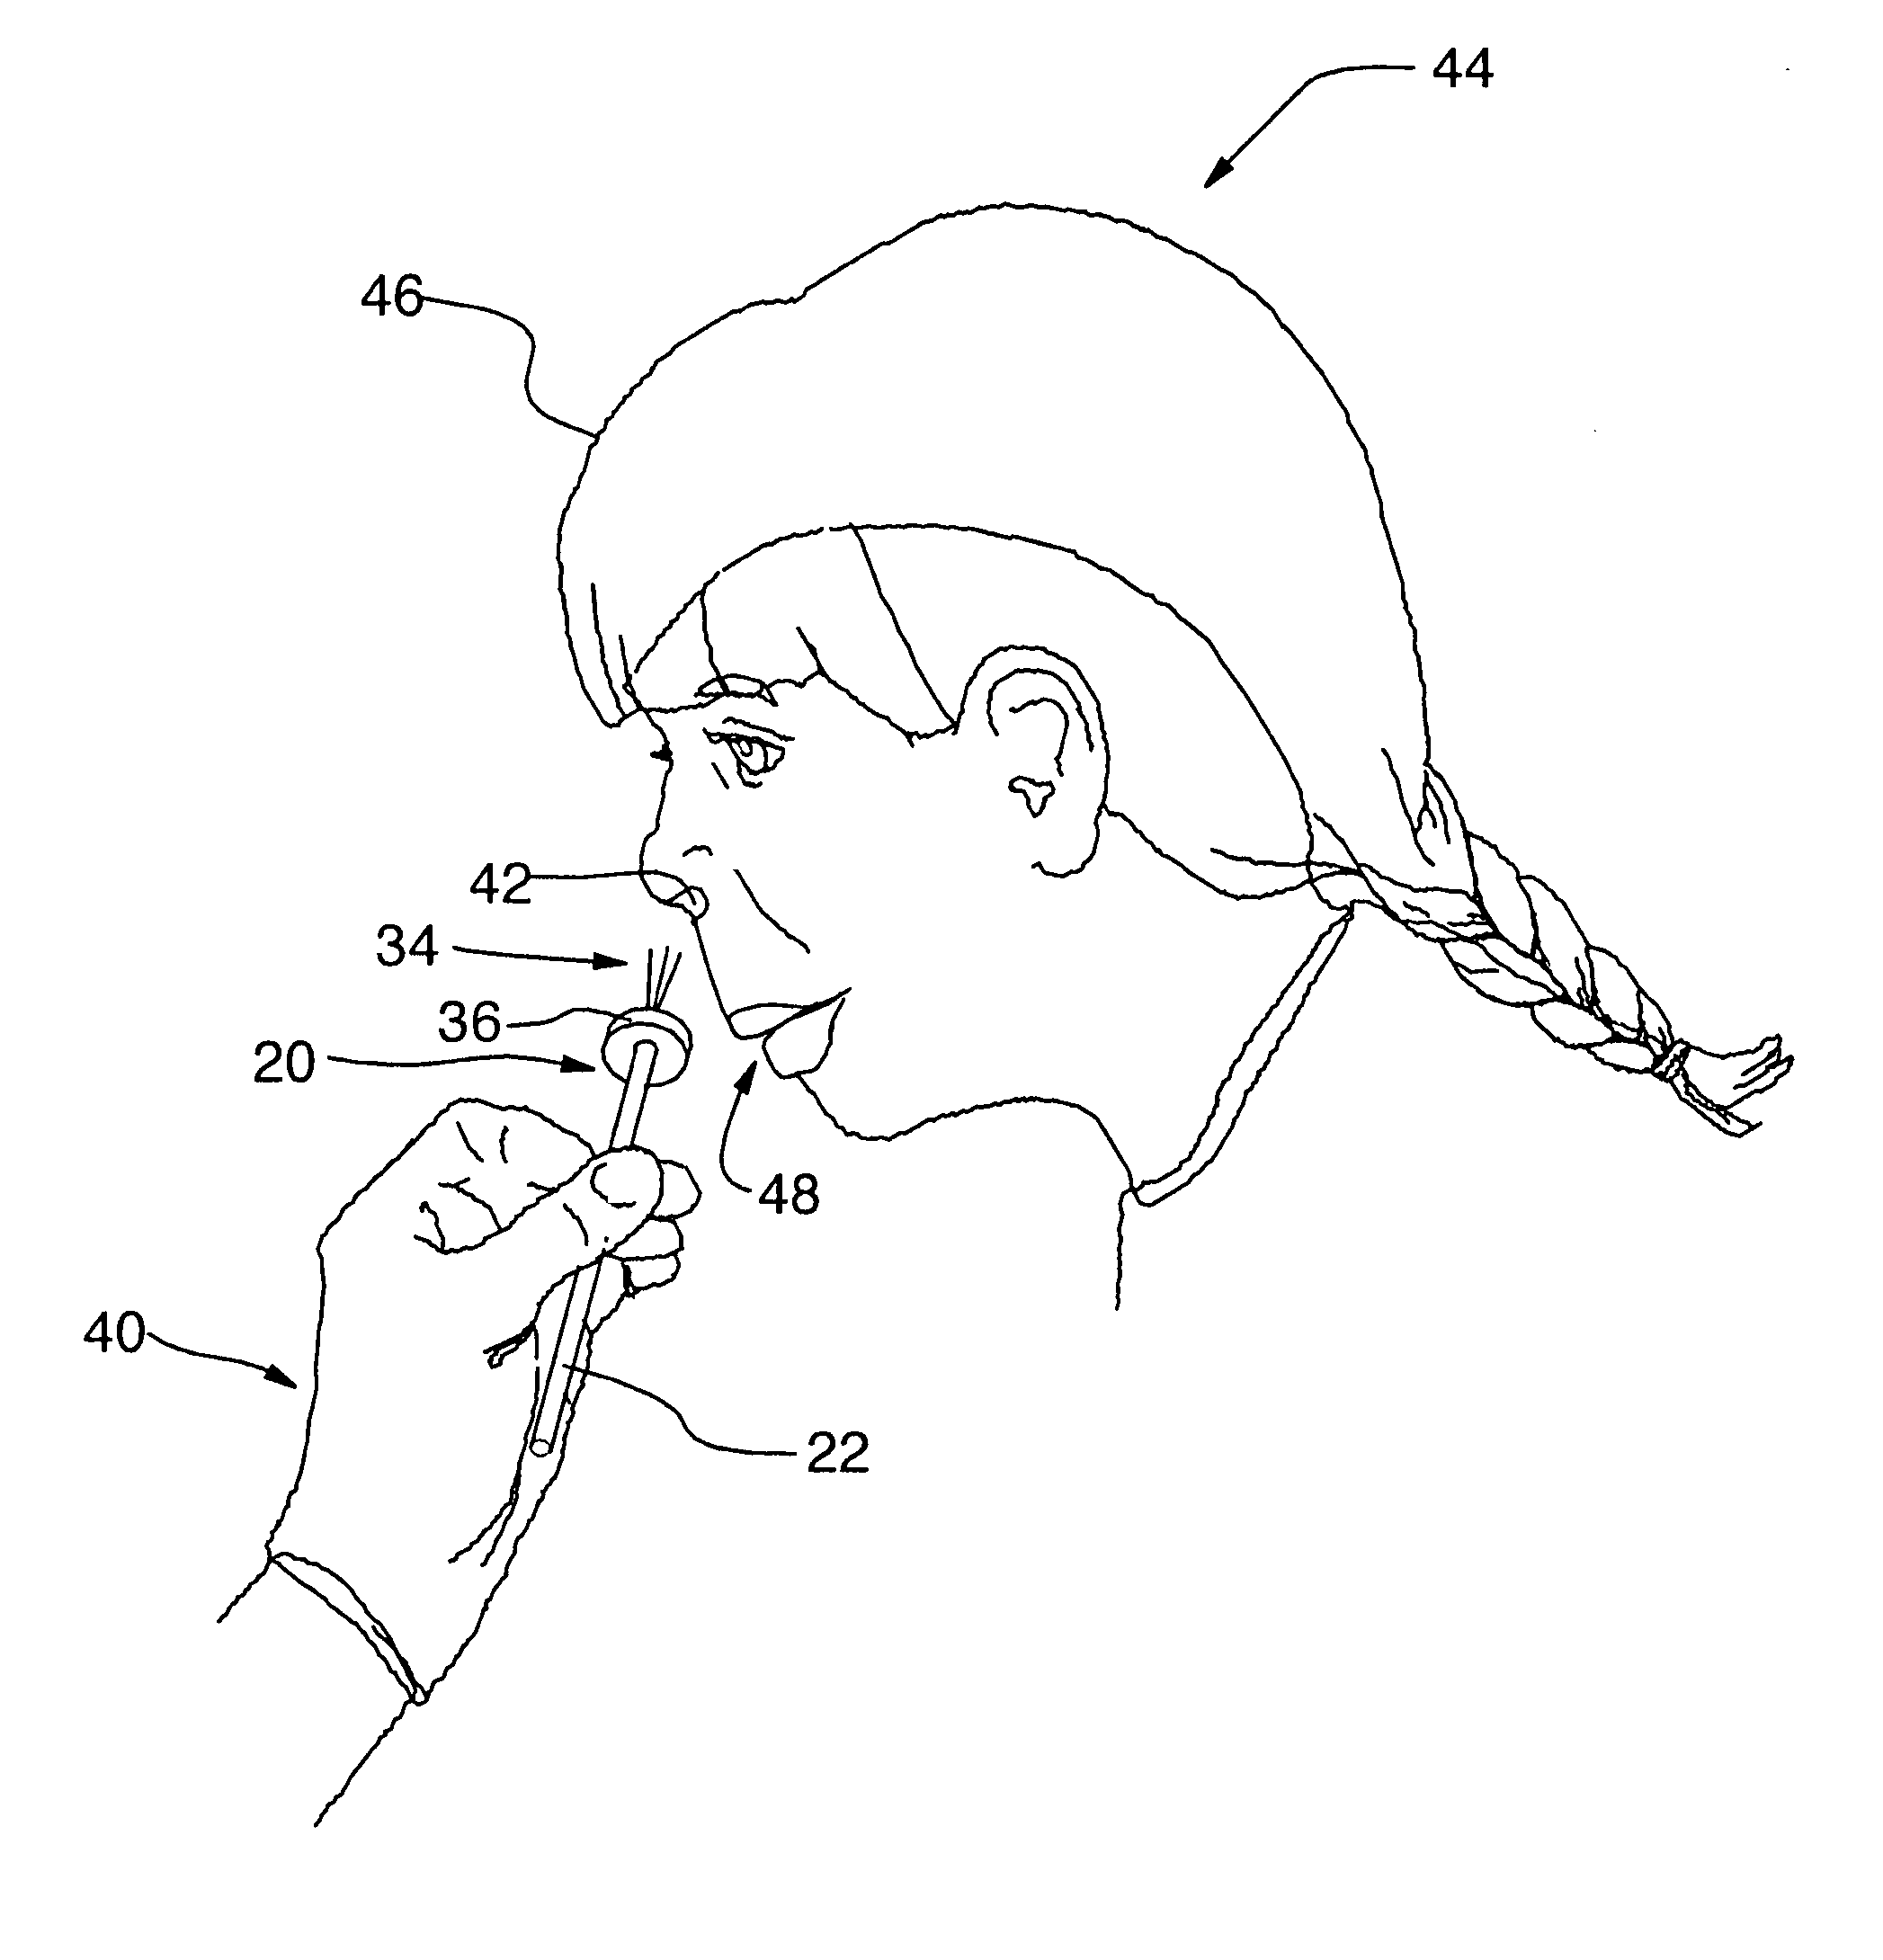 Method and apparatus for alleviating nasal congestion